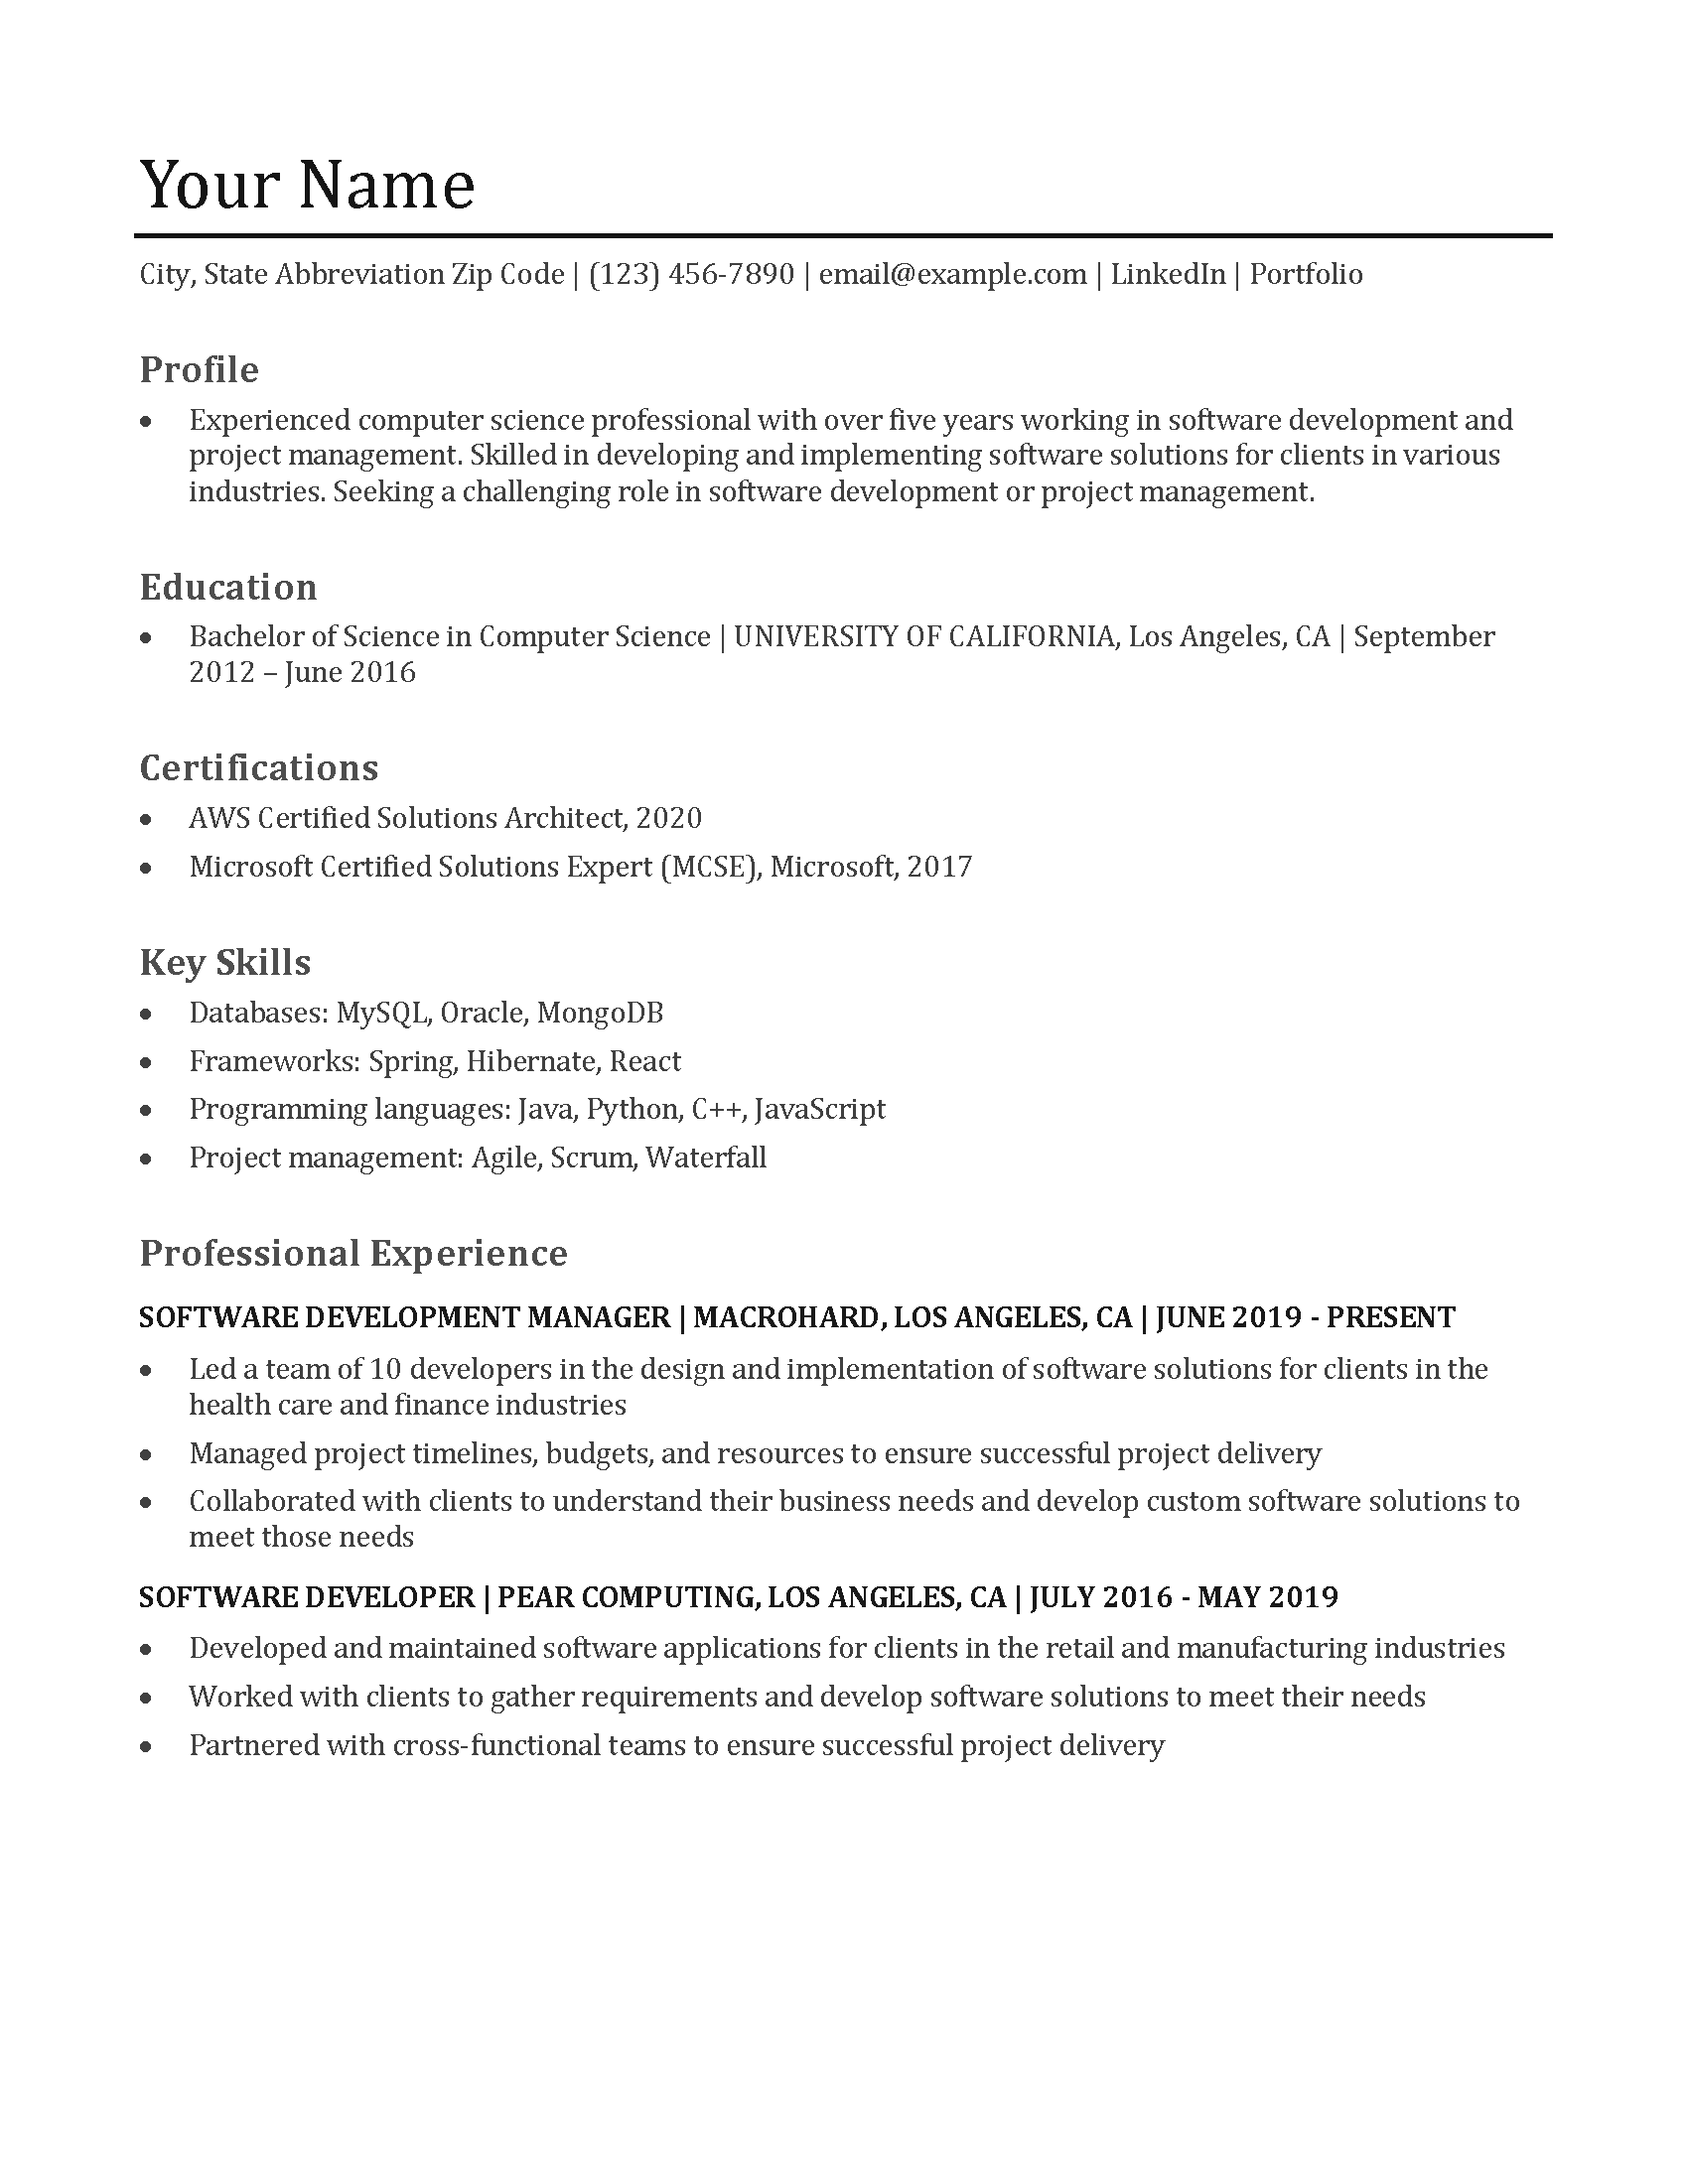 Computer Science Resume Example Banner Image